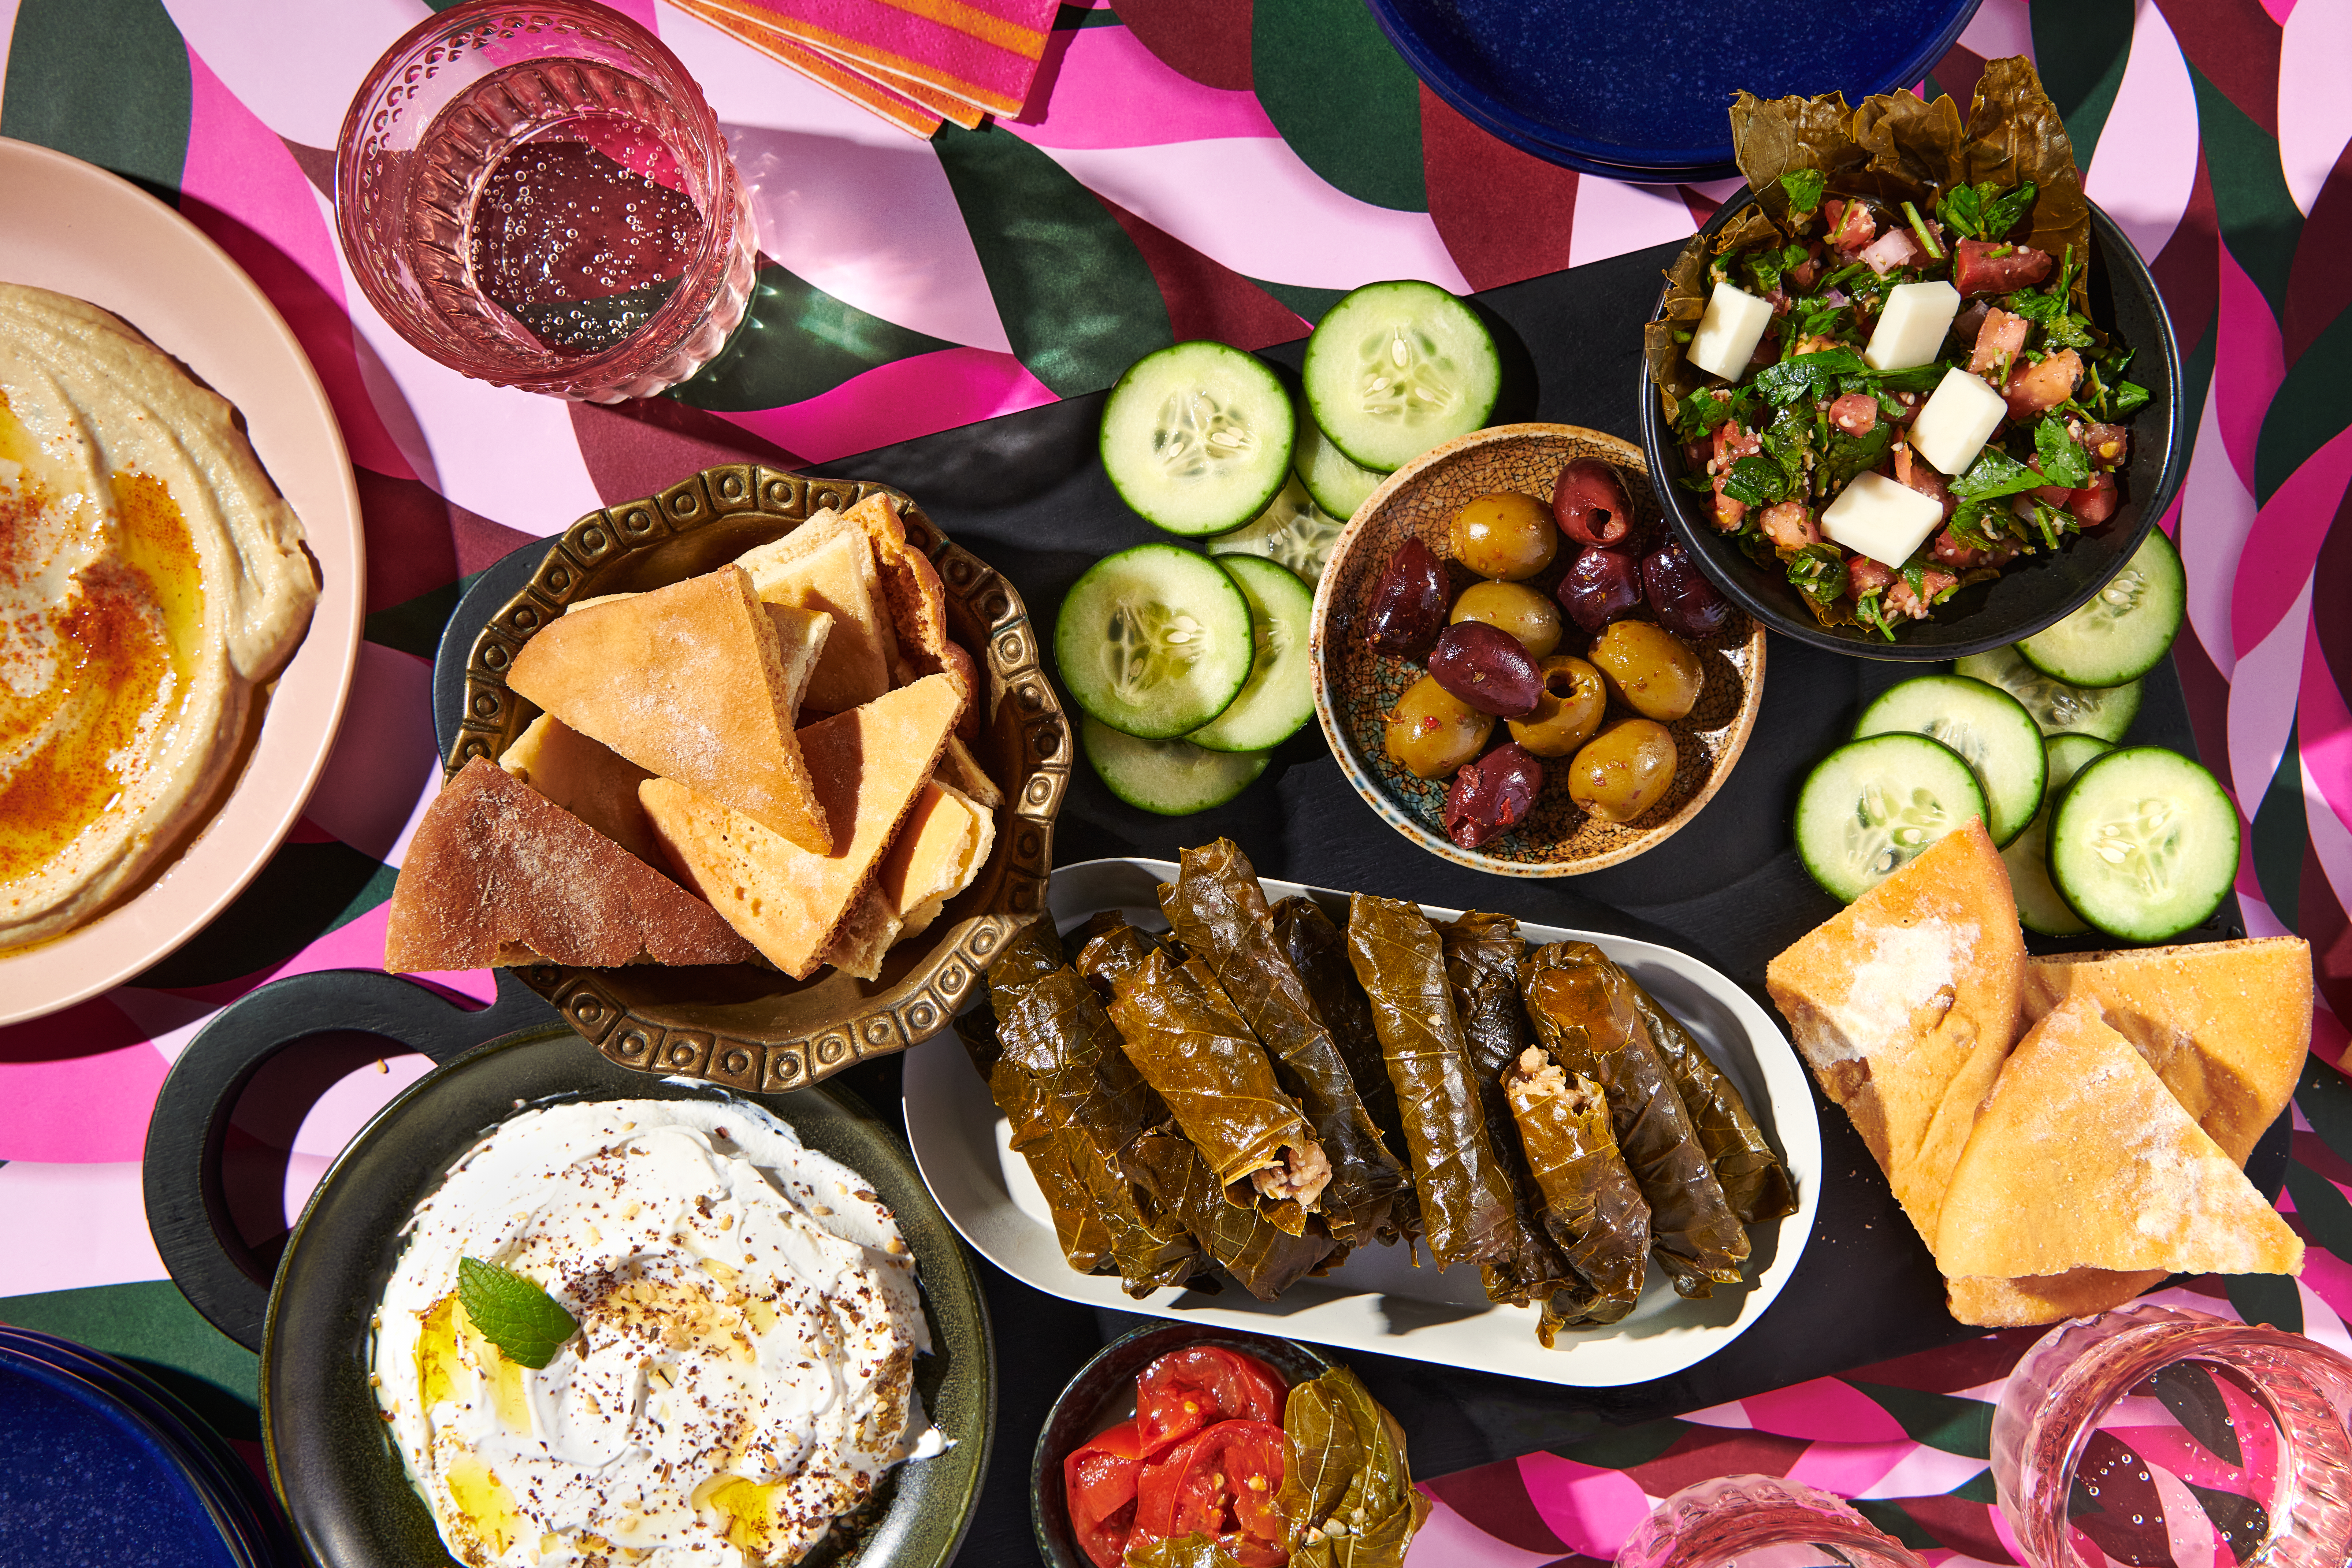 Stuffed grape leaves served on a platter as part of a spread of food including hummus, olives, and pita chips.